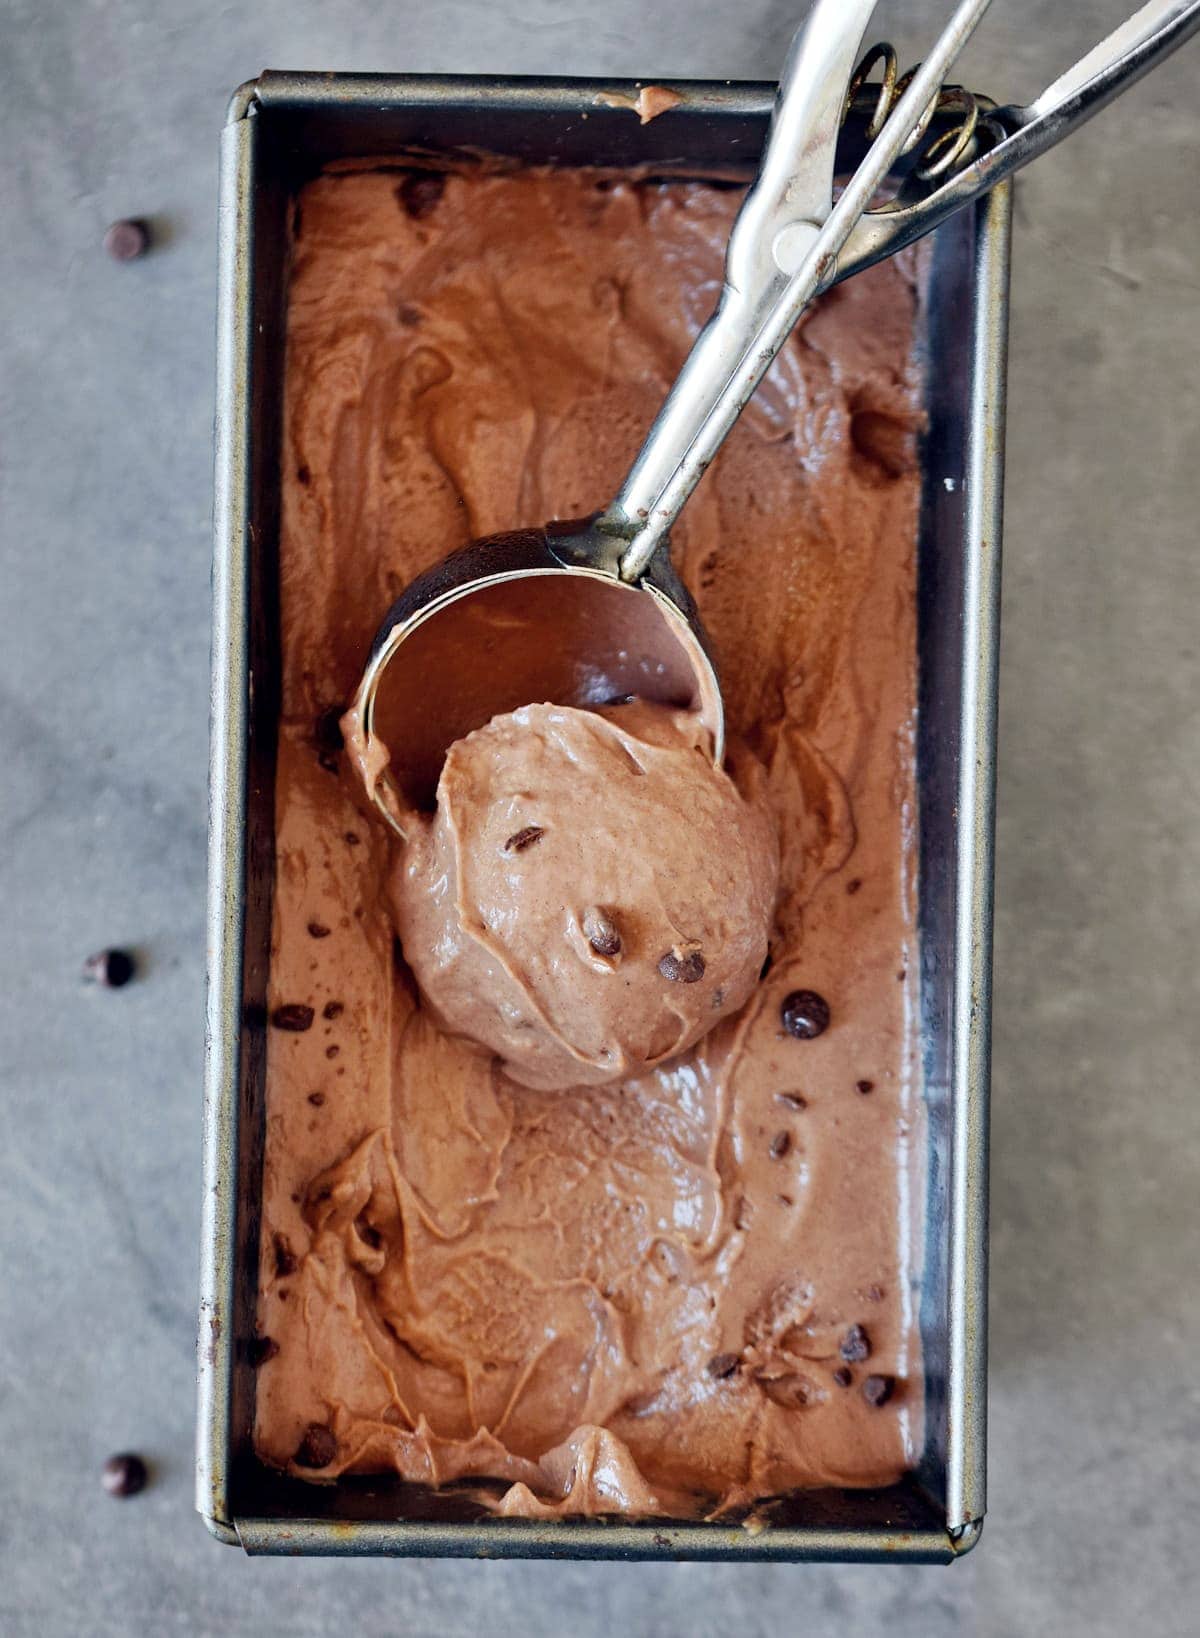 Metal loaf pan filled with vegan chocolate ice cream and an ice cream scoop scooping some out.